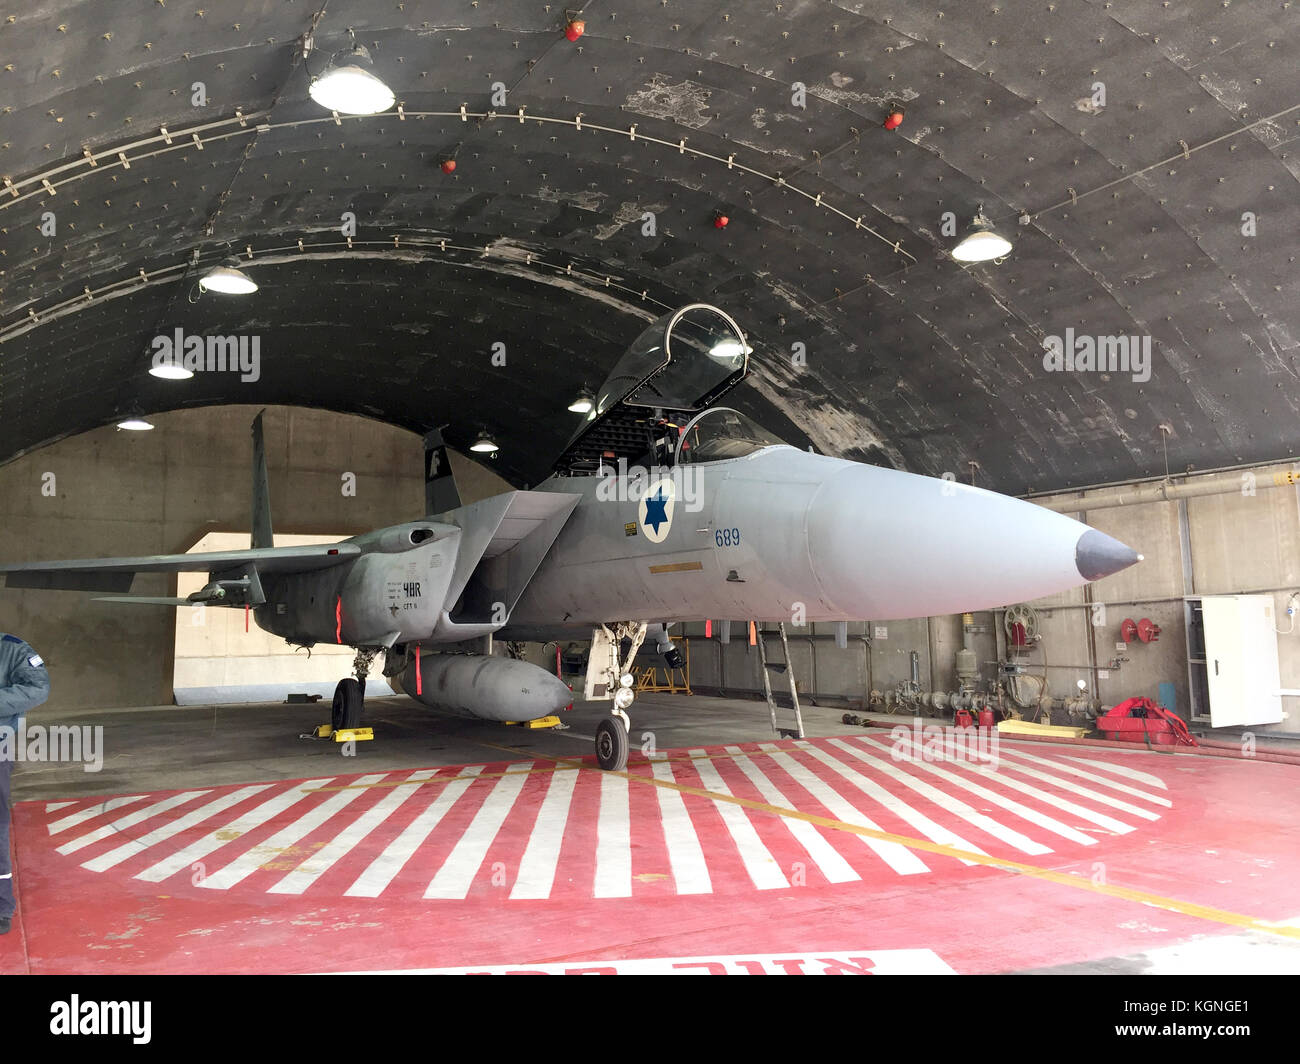 Uvda, Israel. 8th Nov, 2017. A Israeli combat jet F-15 Baz (Eaglle) is parked in a hangar during the the Air Force training 'Blue Flag' in Uvda, Israel, 8 November 2017. Germany is taking part for the first time at the exercise in the Isreali desert where more than eight nations in total are participating. Credit: Sara Lemel/dpa/Alamy Live News Stock Photo